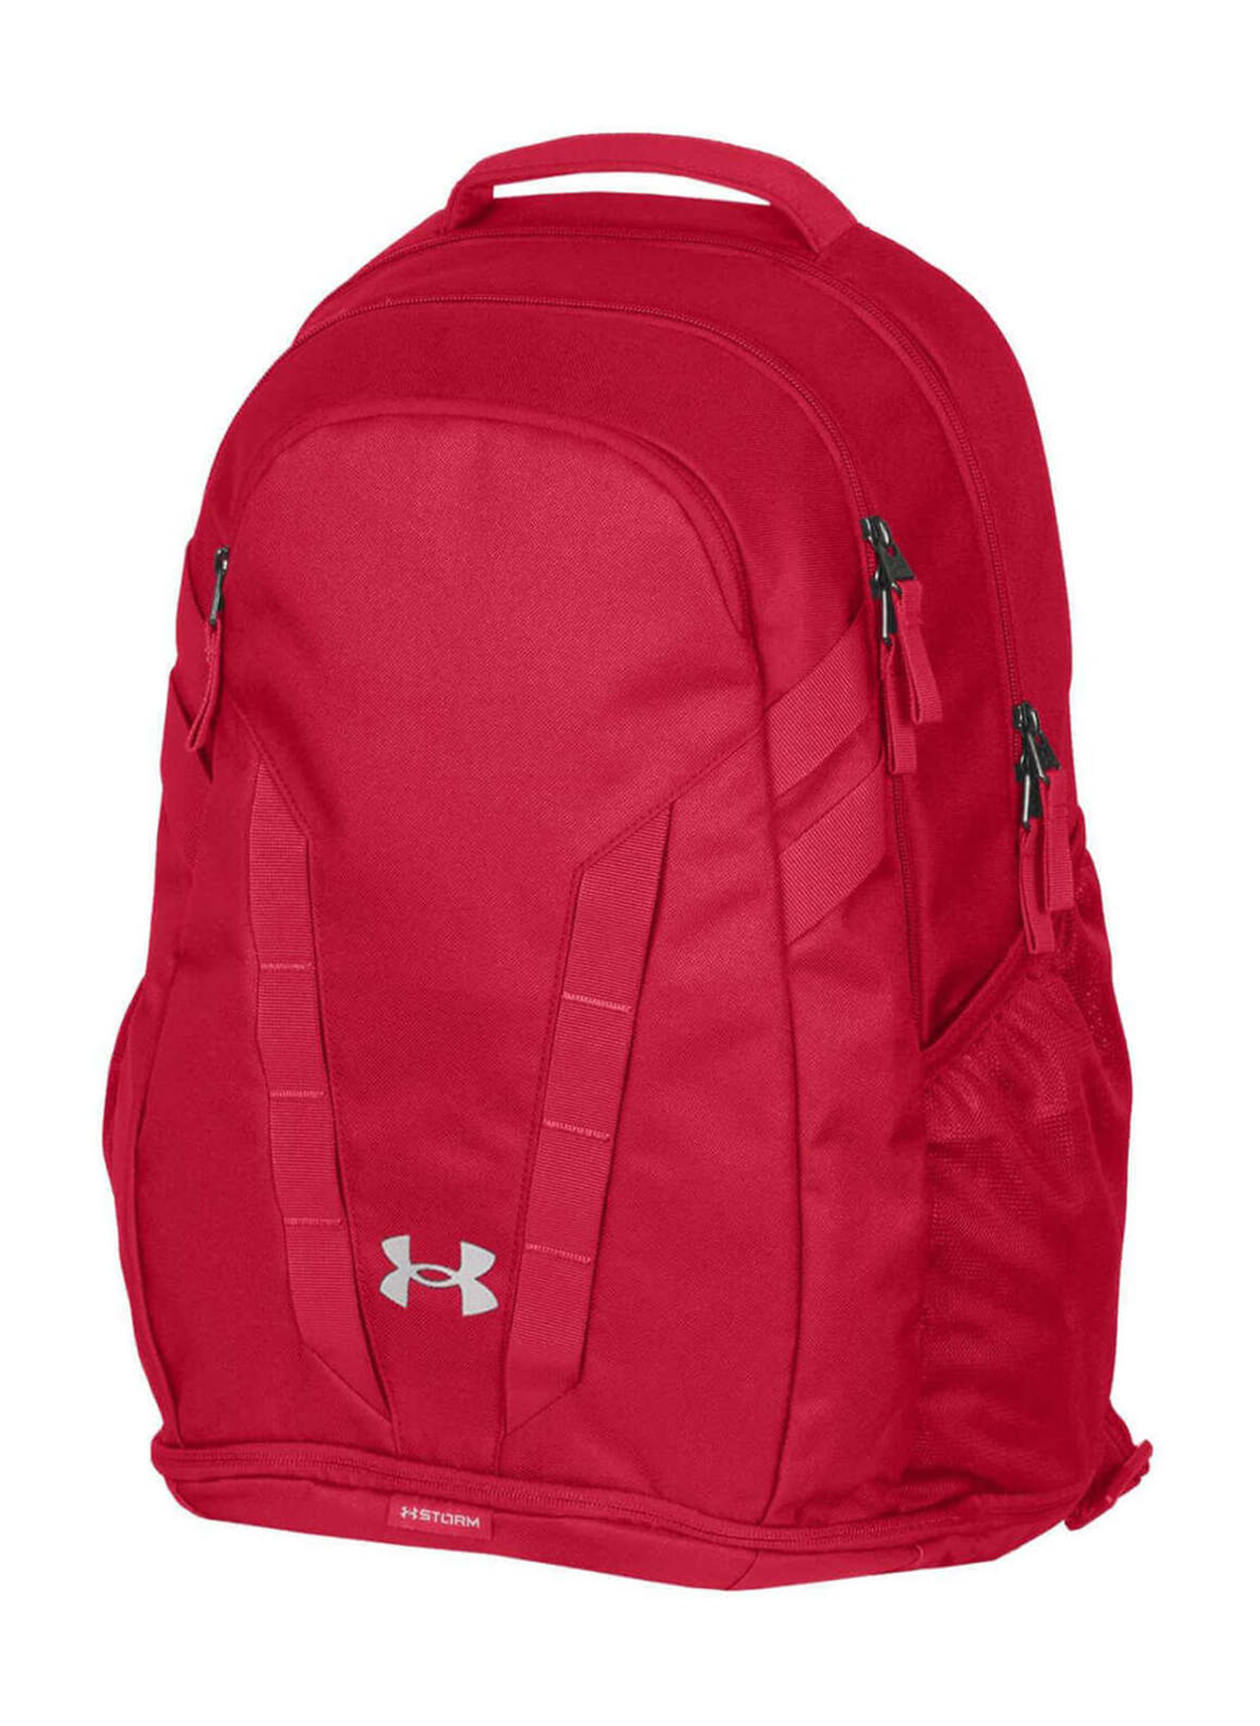 Under Armour Hustle 5.0 Backpack Review 